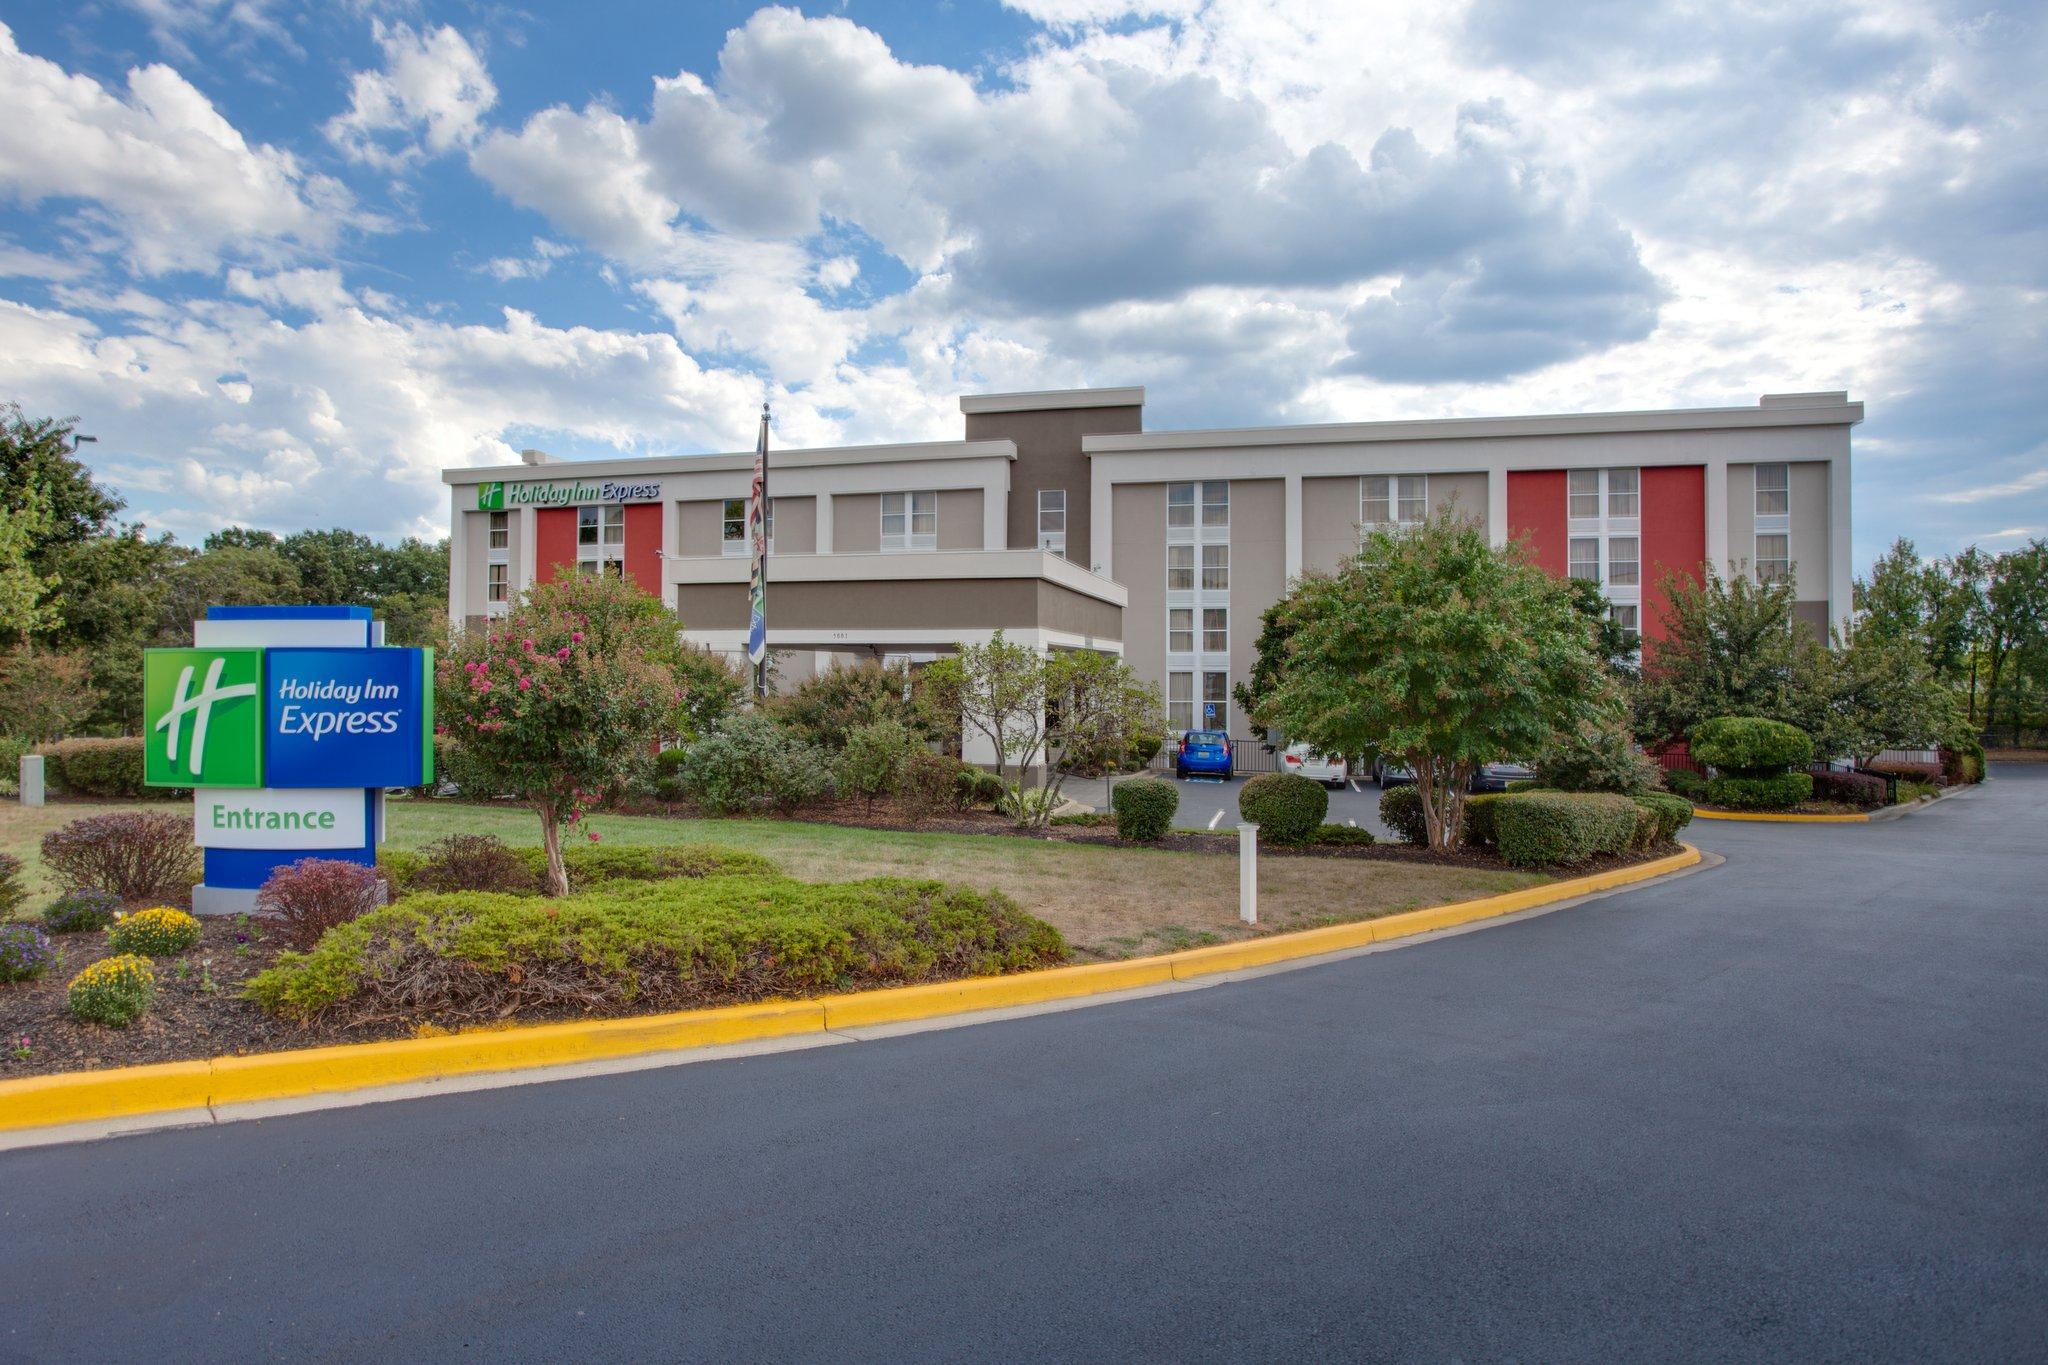 Holiday Inn Express Washington DC East- Andrews AFB in Camp Springs, MD